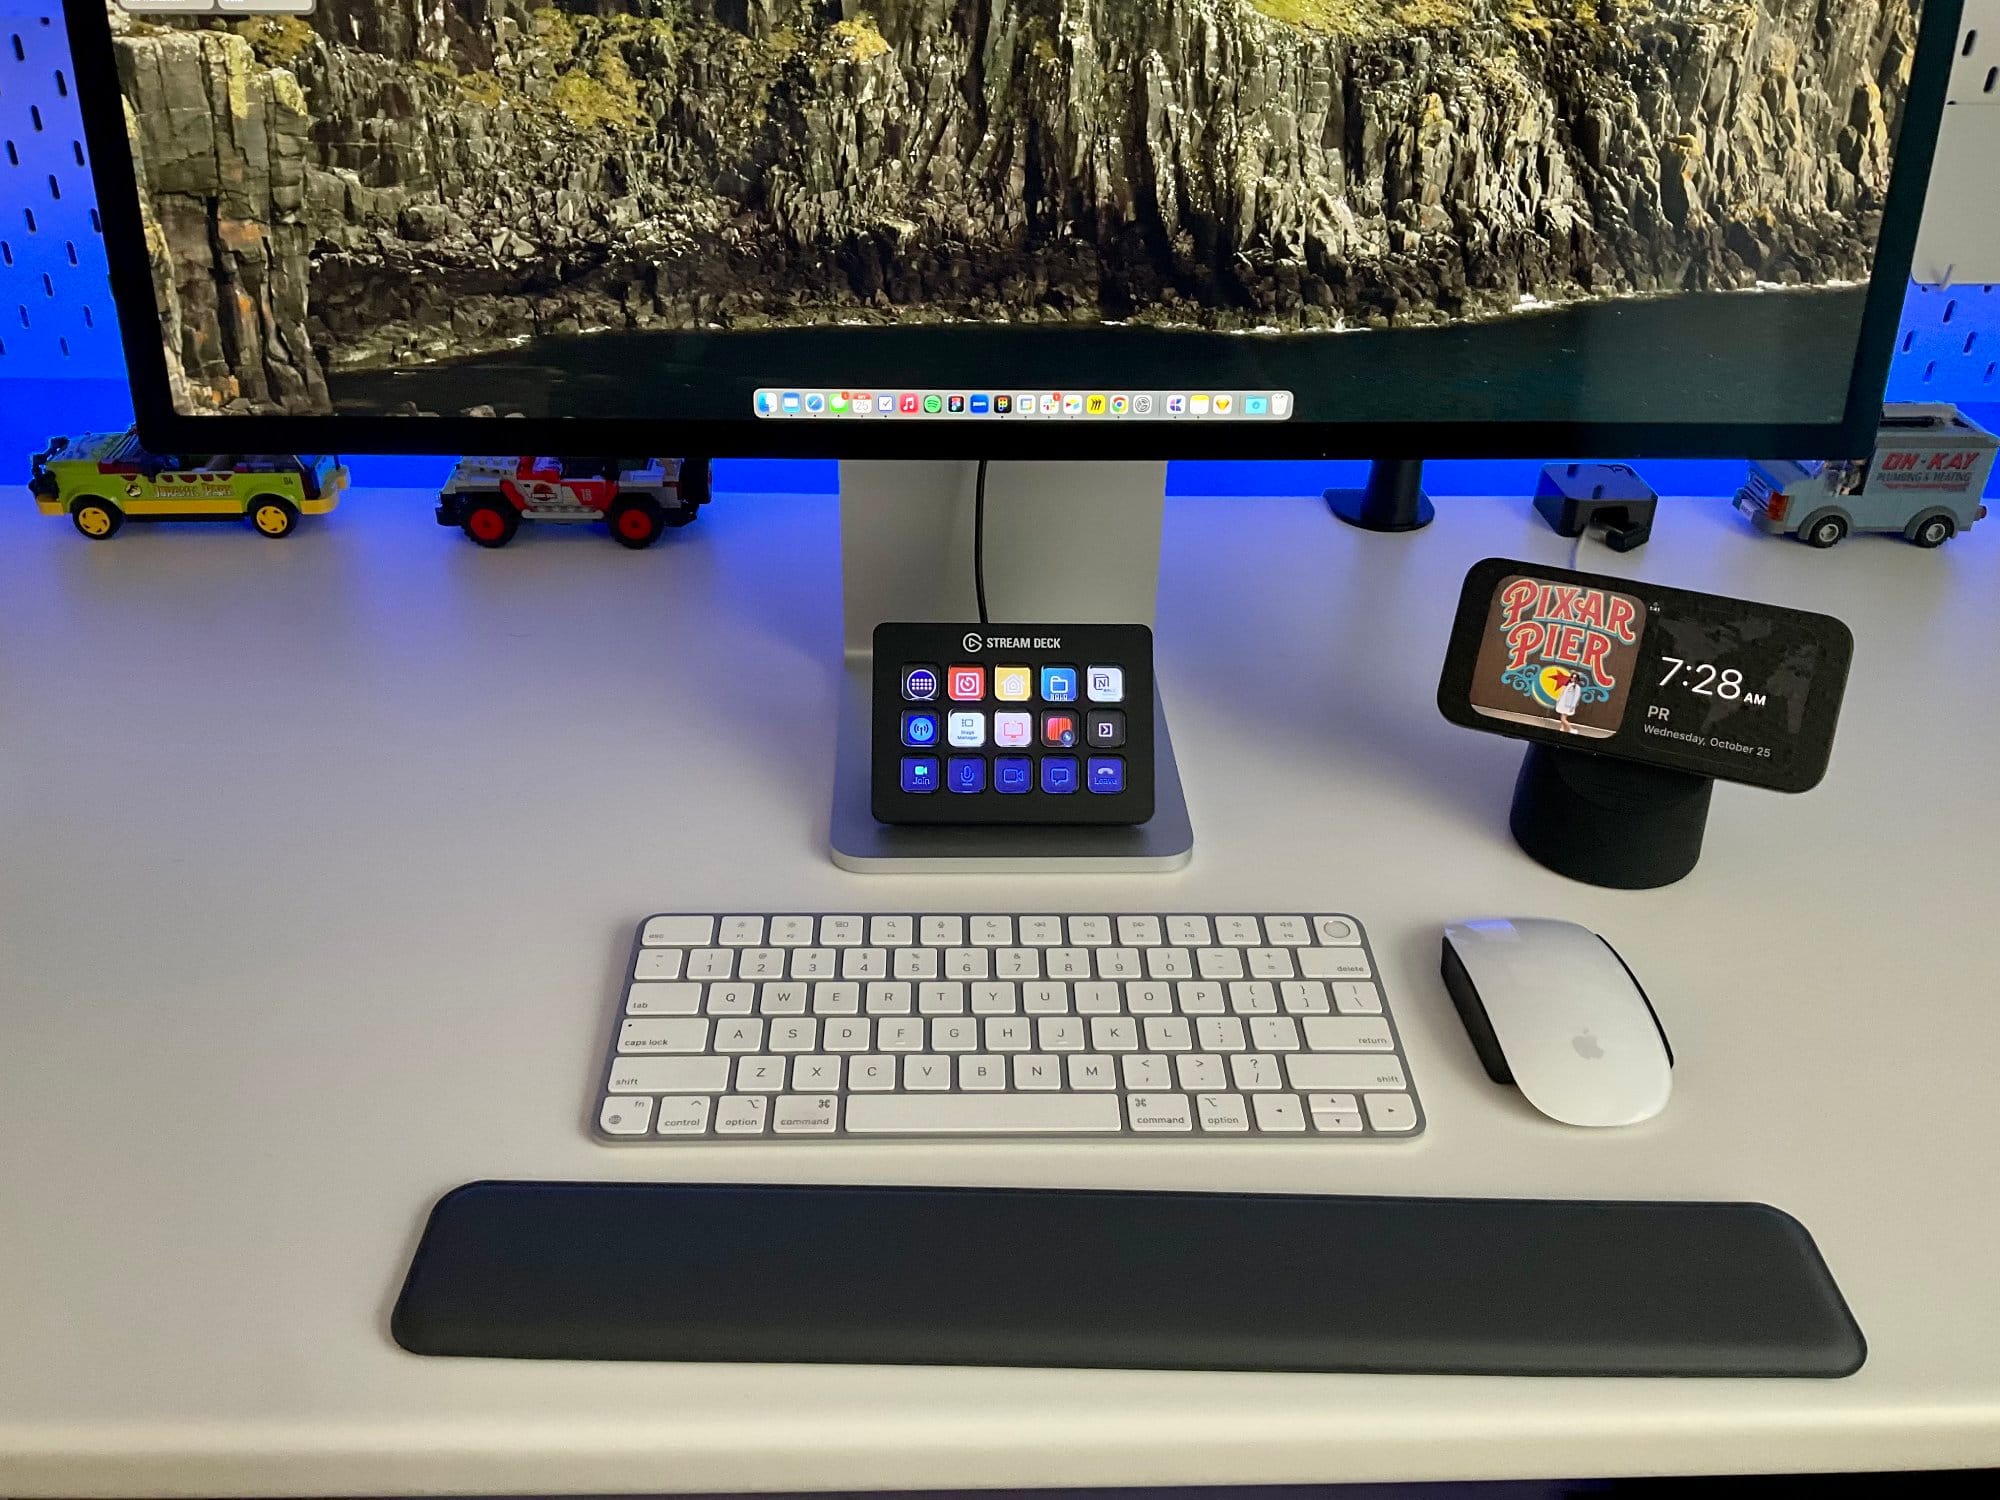 A desk with a monitor, keyboard, mouse, a stream deck with icons, a smartphone showing the time and a weather widget, and two toy cars underneath the monitor